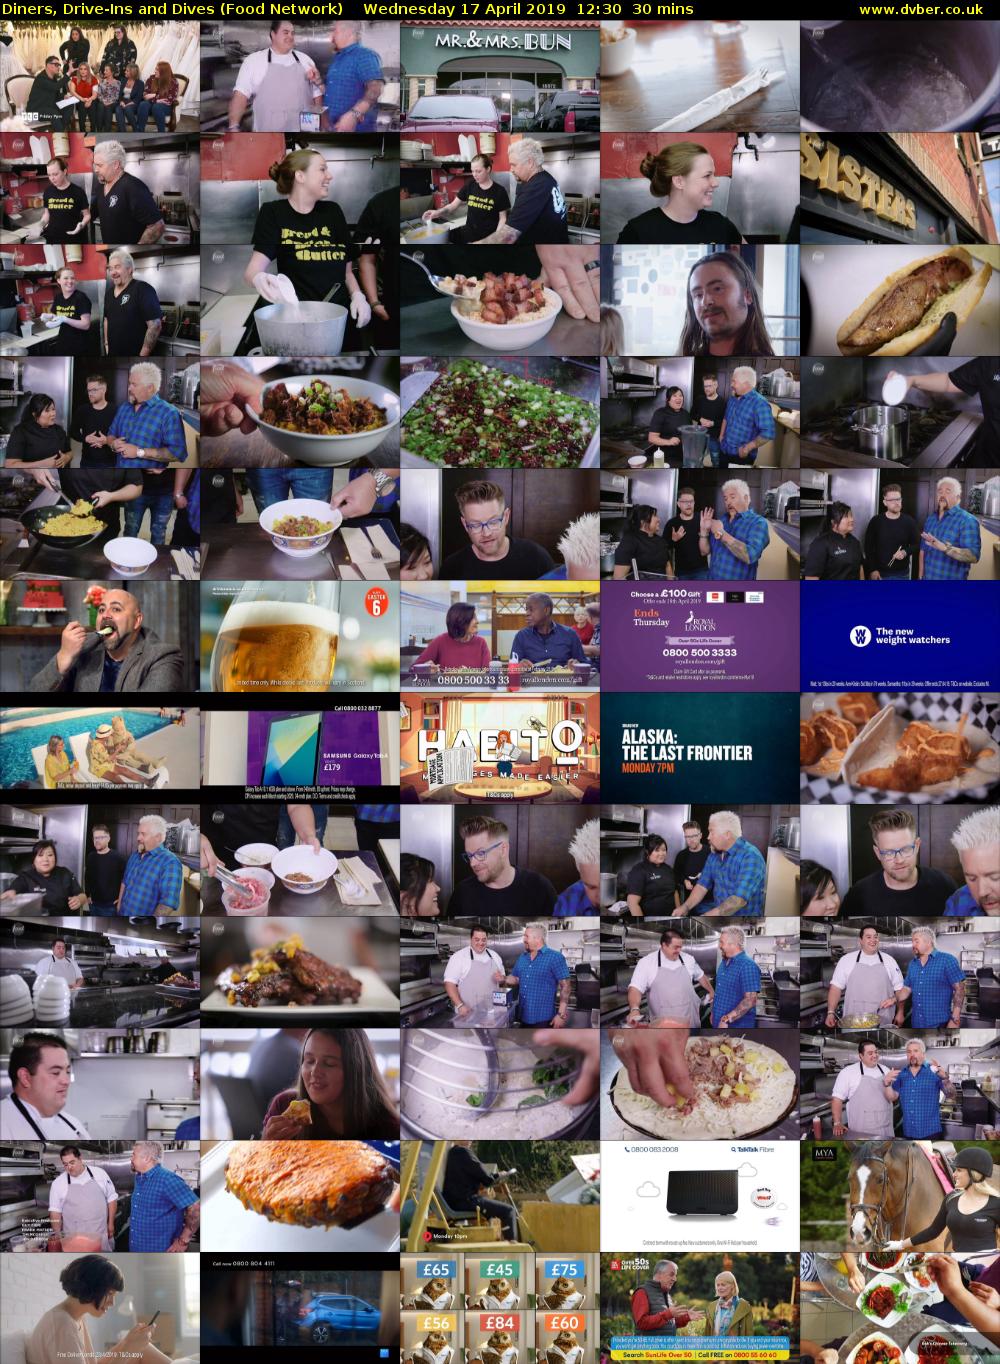 Diners, Drive-Ins and Dives (Food Network) Wednesday 17 April 2019 12:30 - 13:00